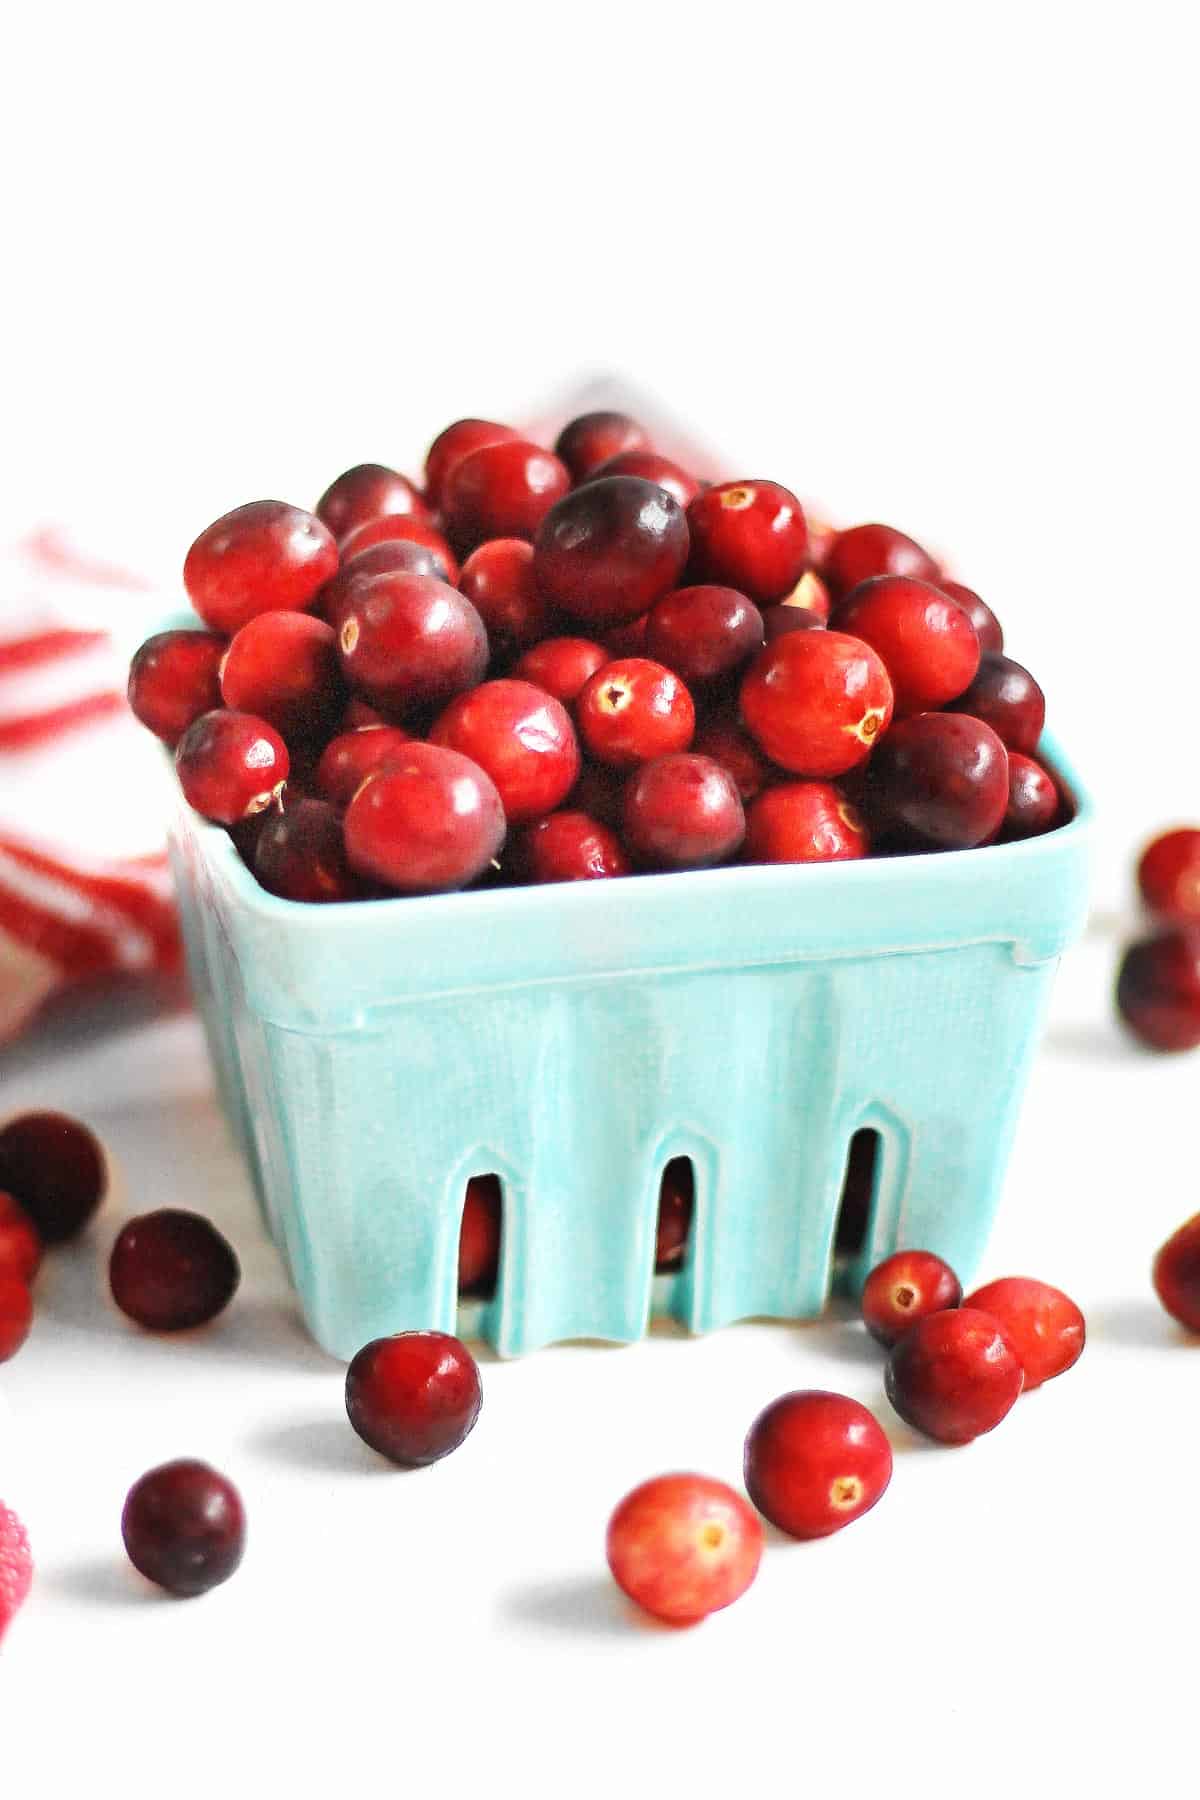 A photo of fresh cranberries in a farmers market basket.